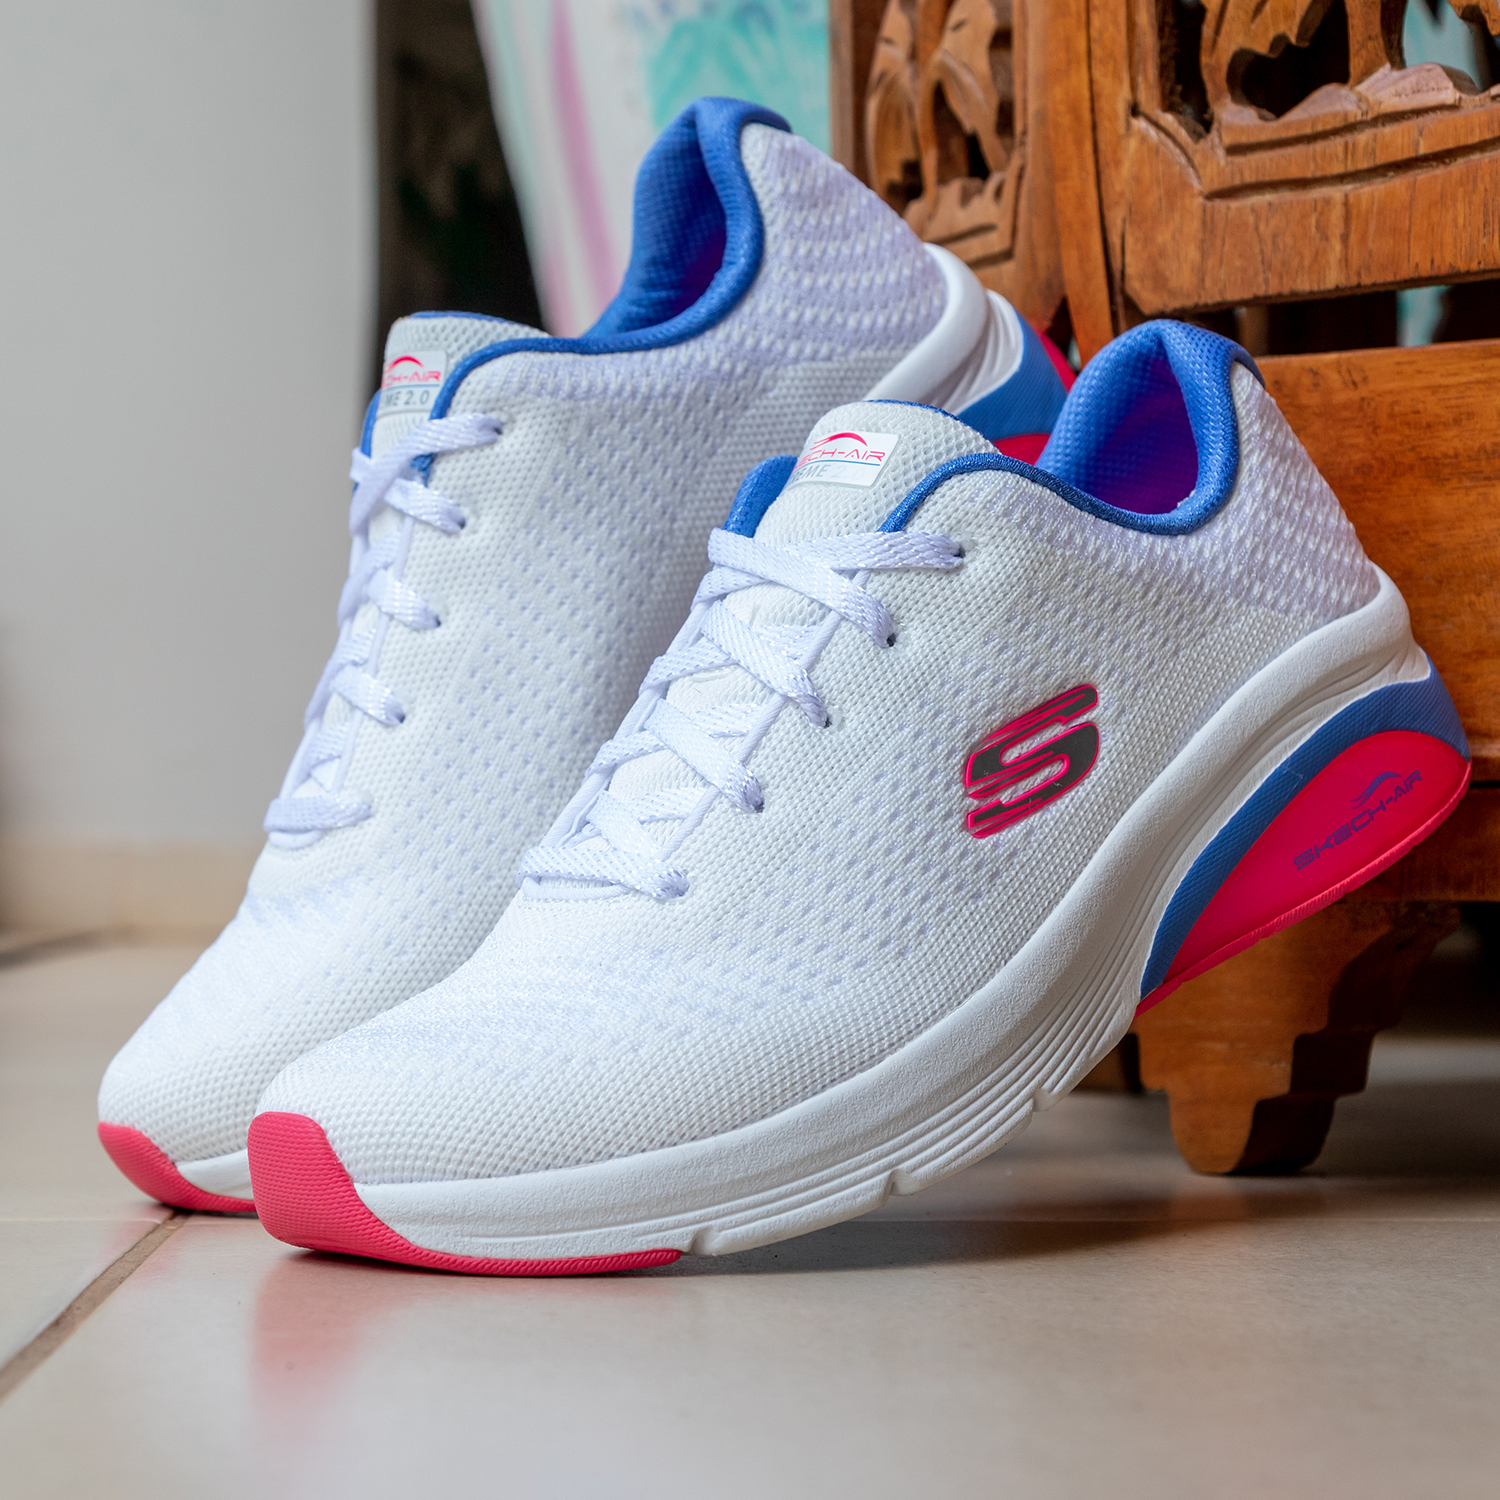 Skechers India on Twitter: "Designed to elevate your Shop now: https://t.co/c6jkfR5Rqr #SkechAir #WomenStyle #SkechersIndia https://t.co/R0iZGCNHbu" / Twitter